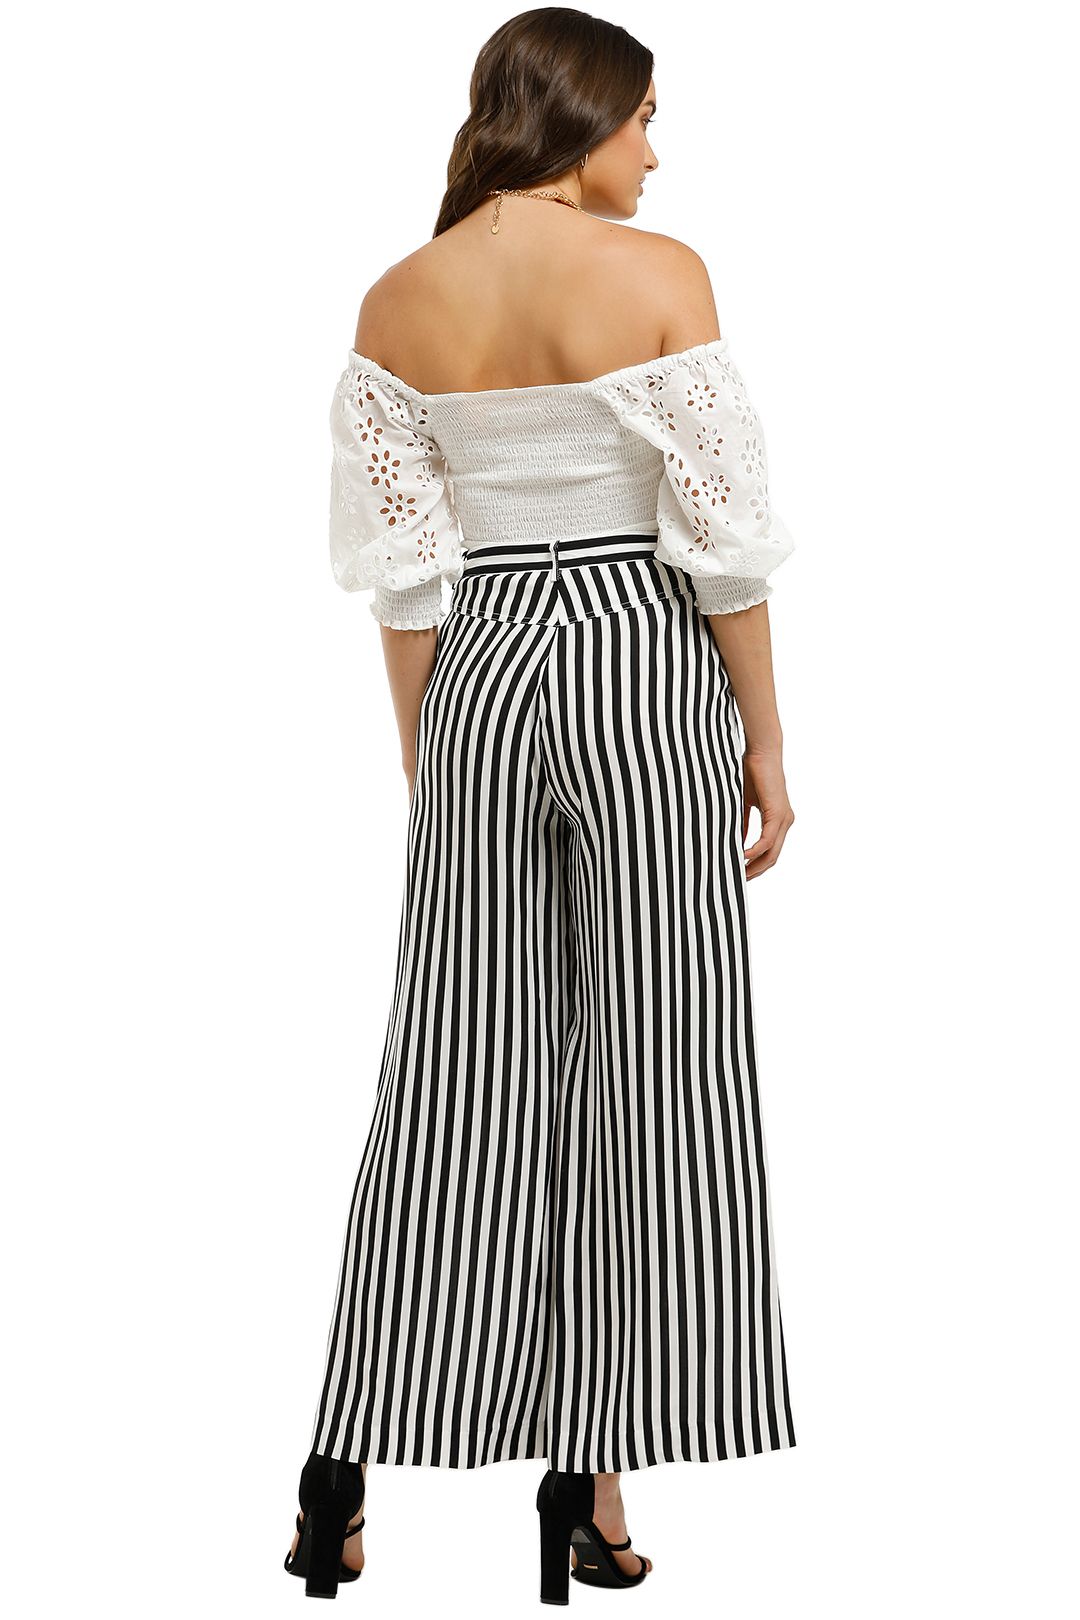 Cooper-By-Trelise-Cooper-Down-The-Line-Pant-Black-White-Stripe-Back